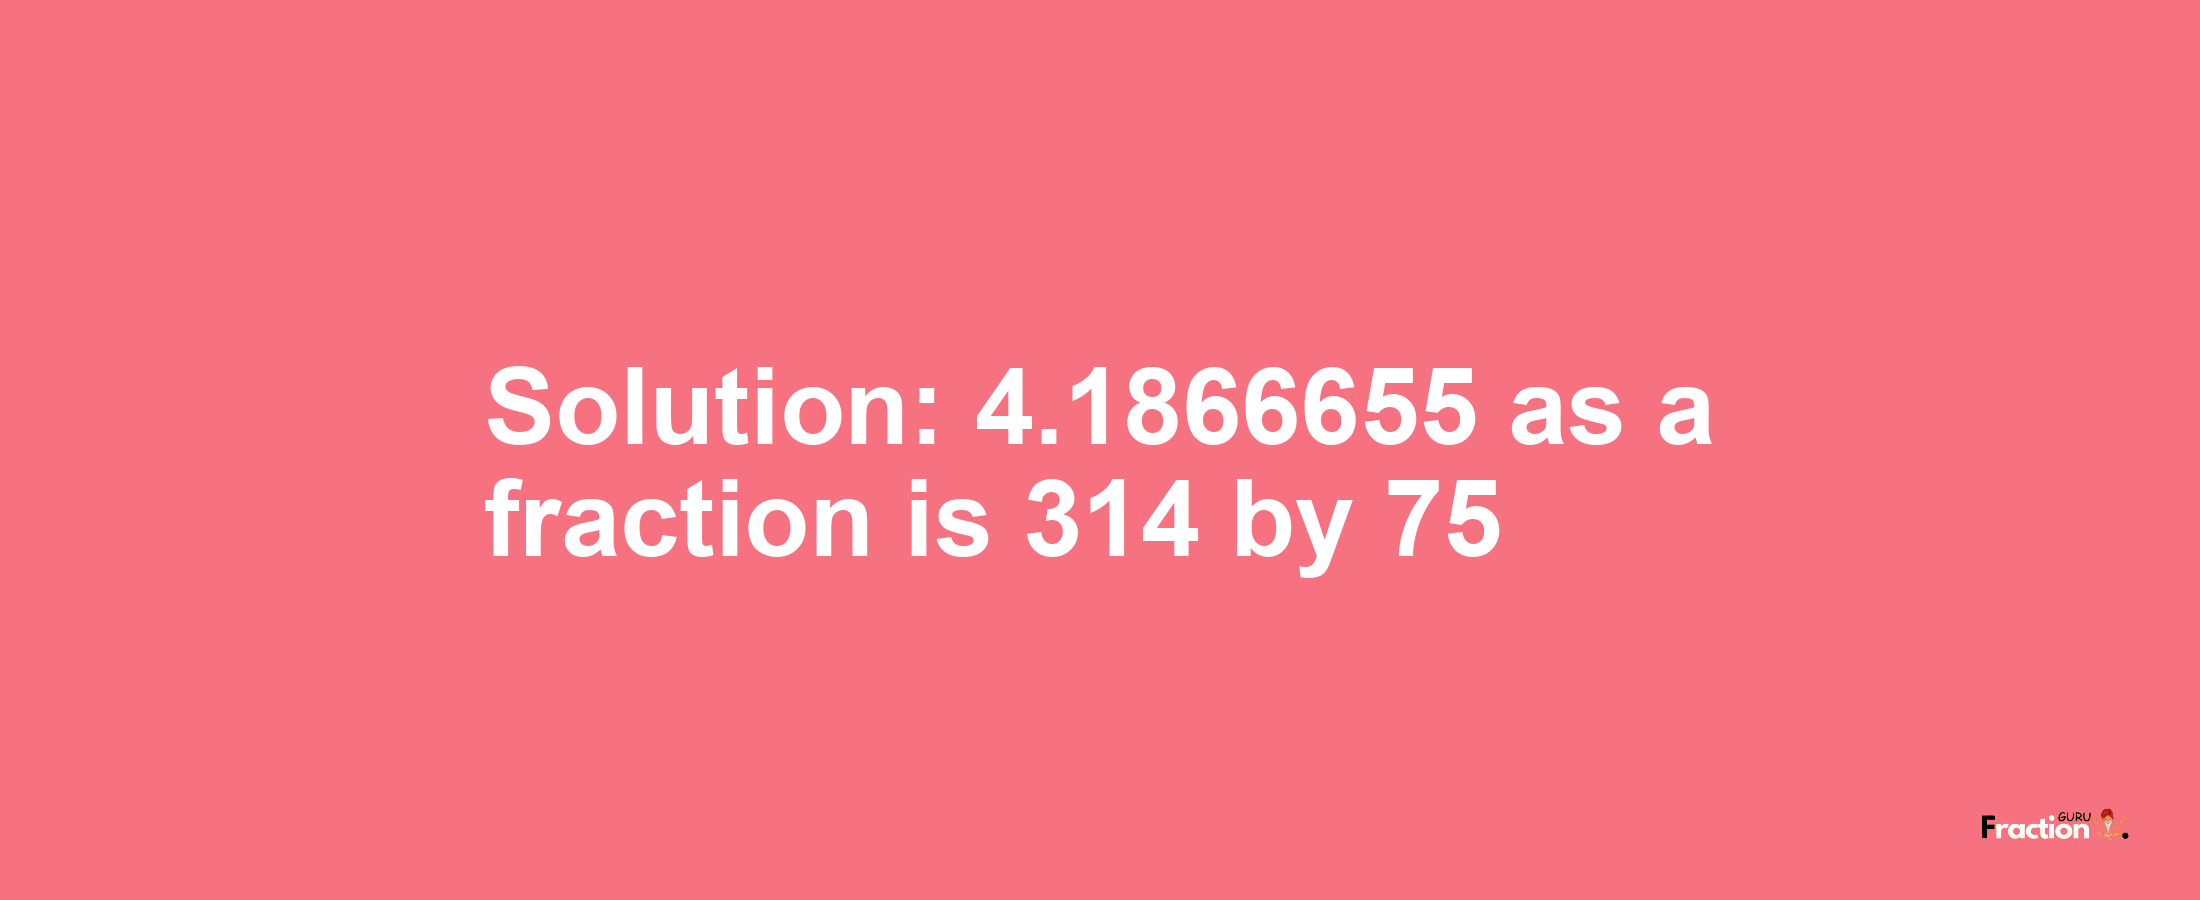 Solution:4.1866655 as a fraction is 314/75